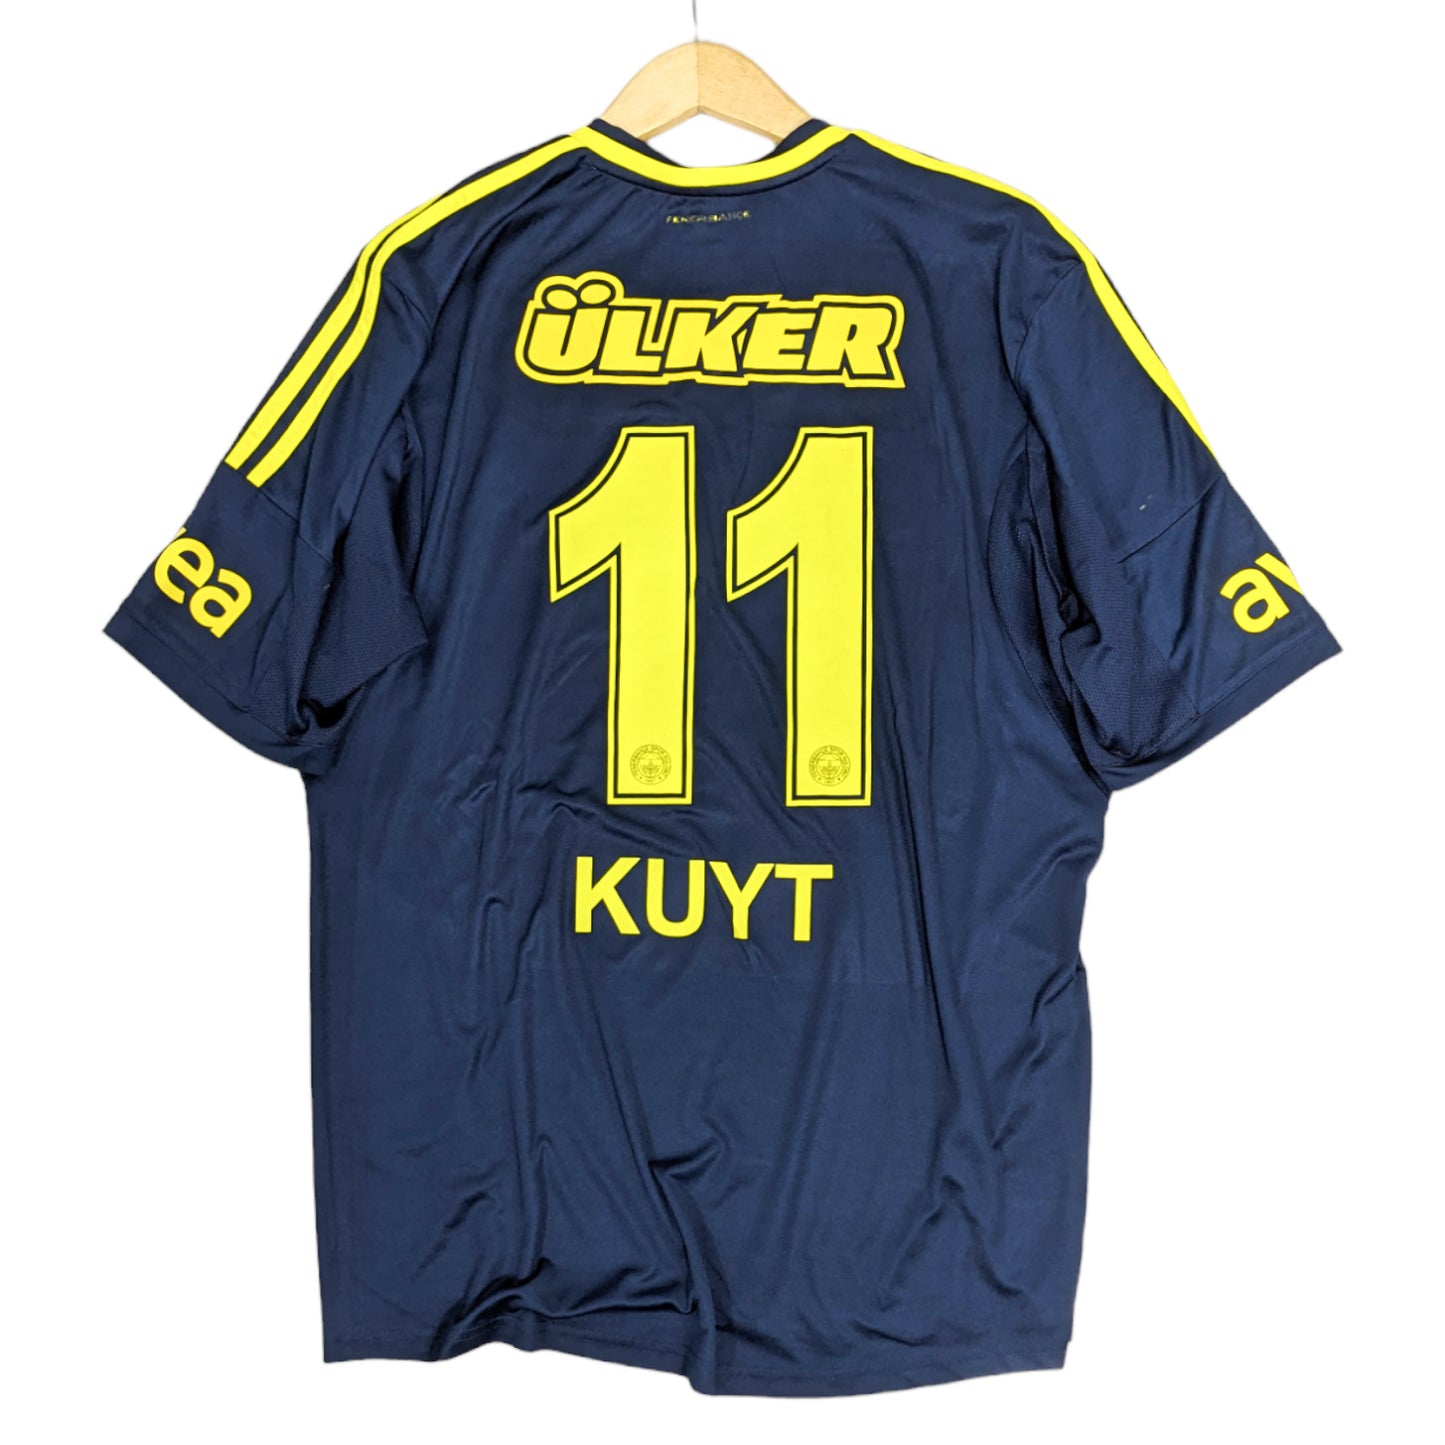 Authentic Fenerbahce 2013/2014 Third - Kuyt #11 Size XL